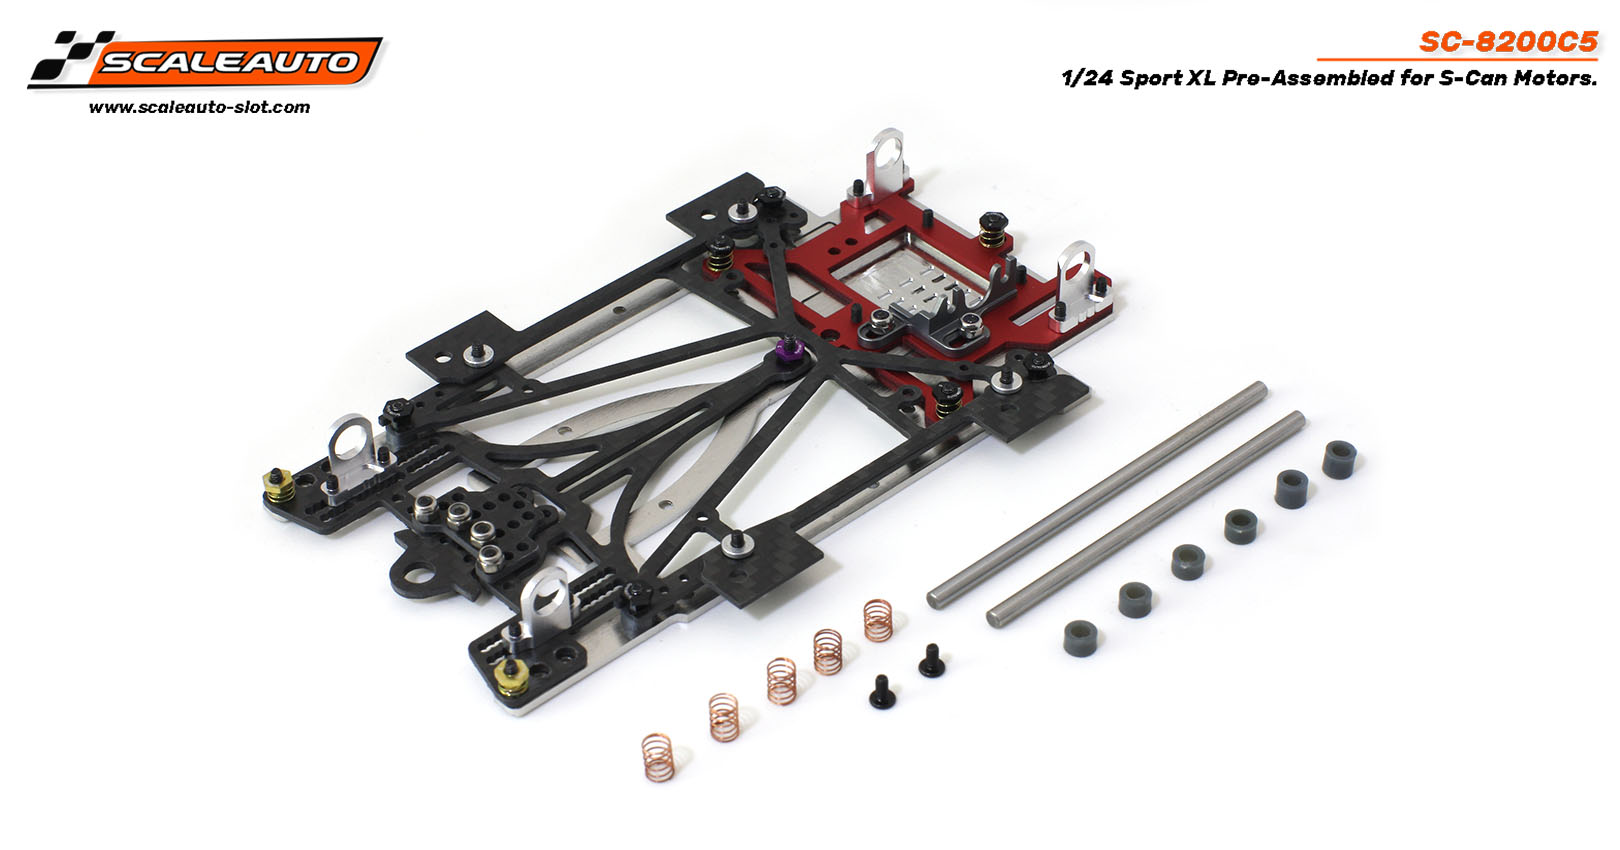 SC-8200C5 1:24 Sport XL S-Can Chassis Kit Assembled Standard H Plate